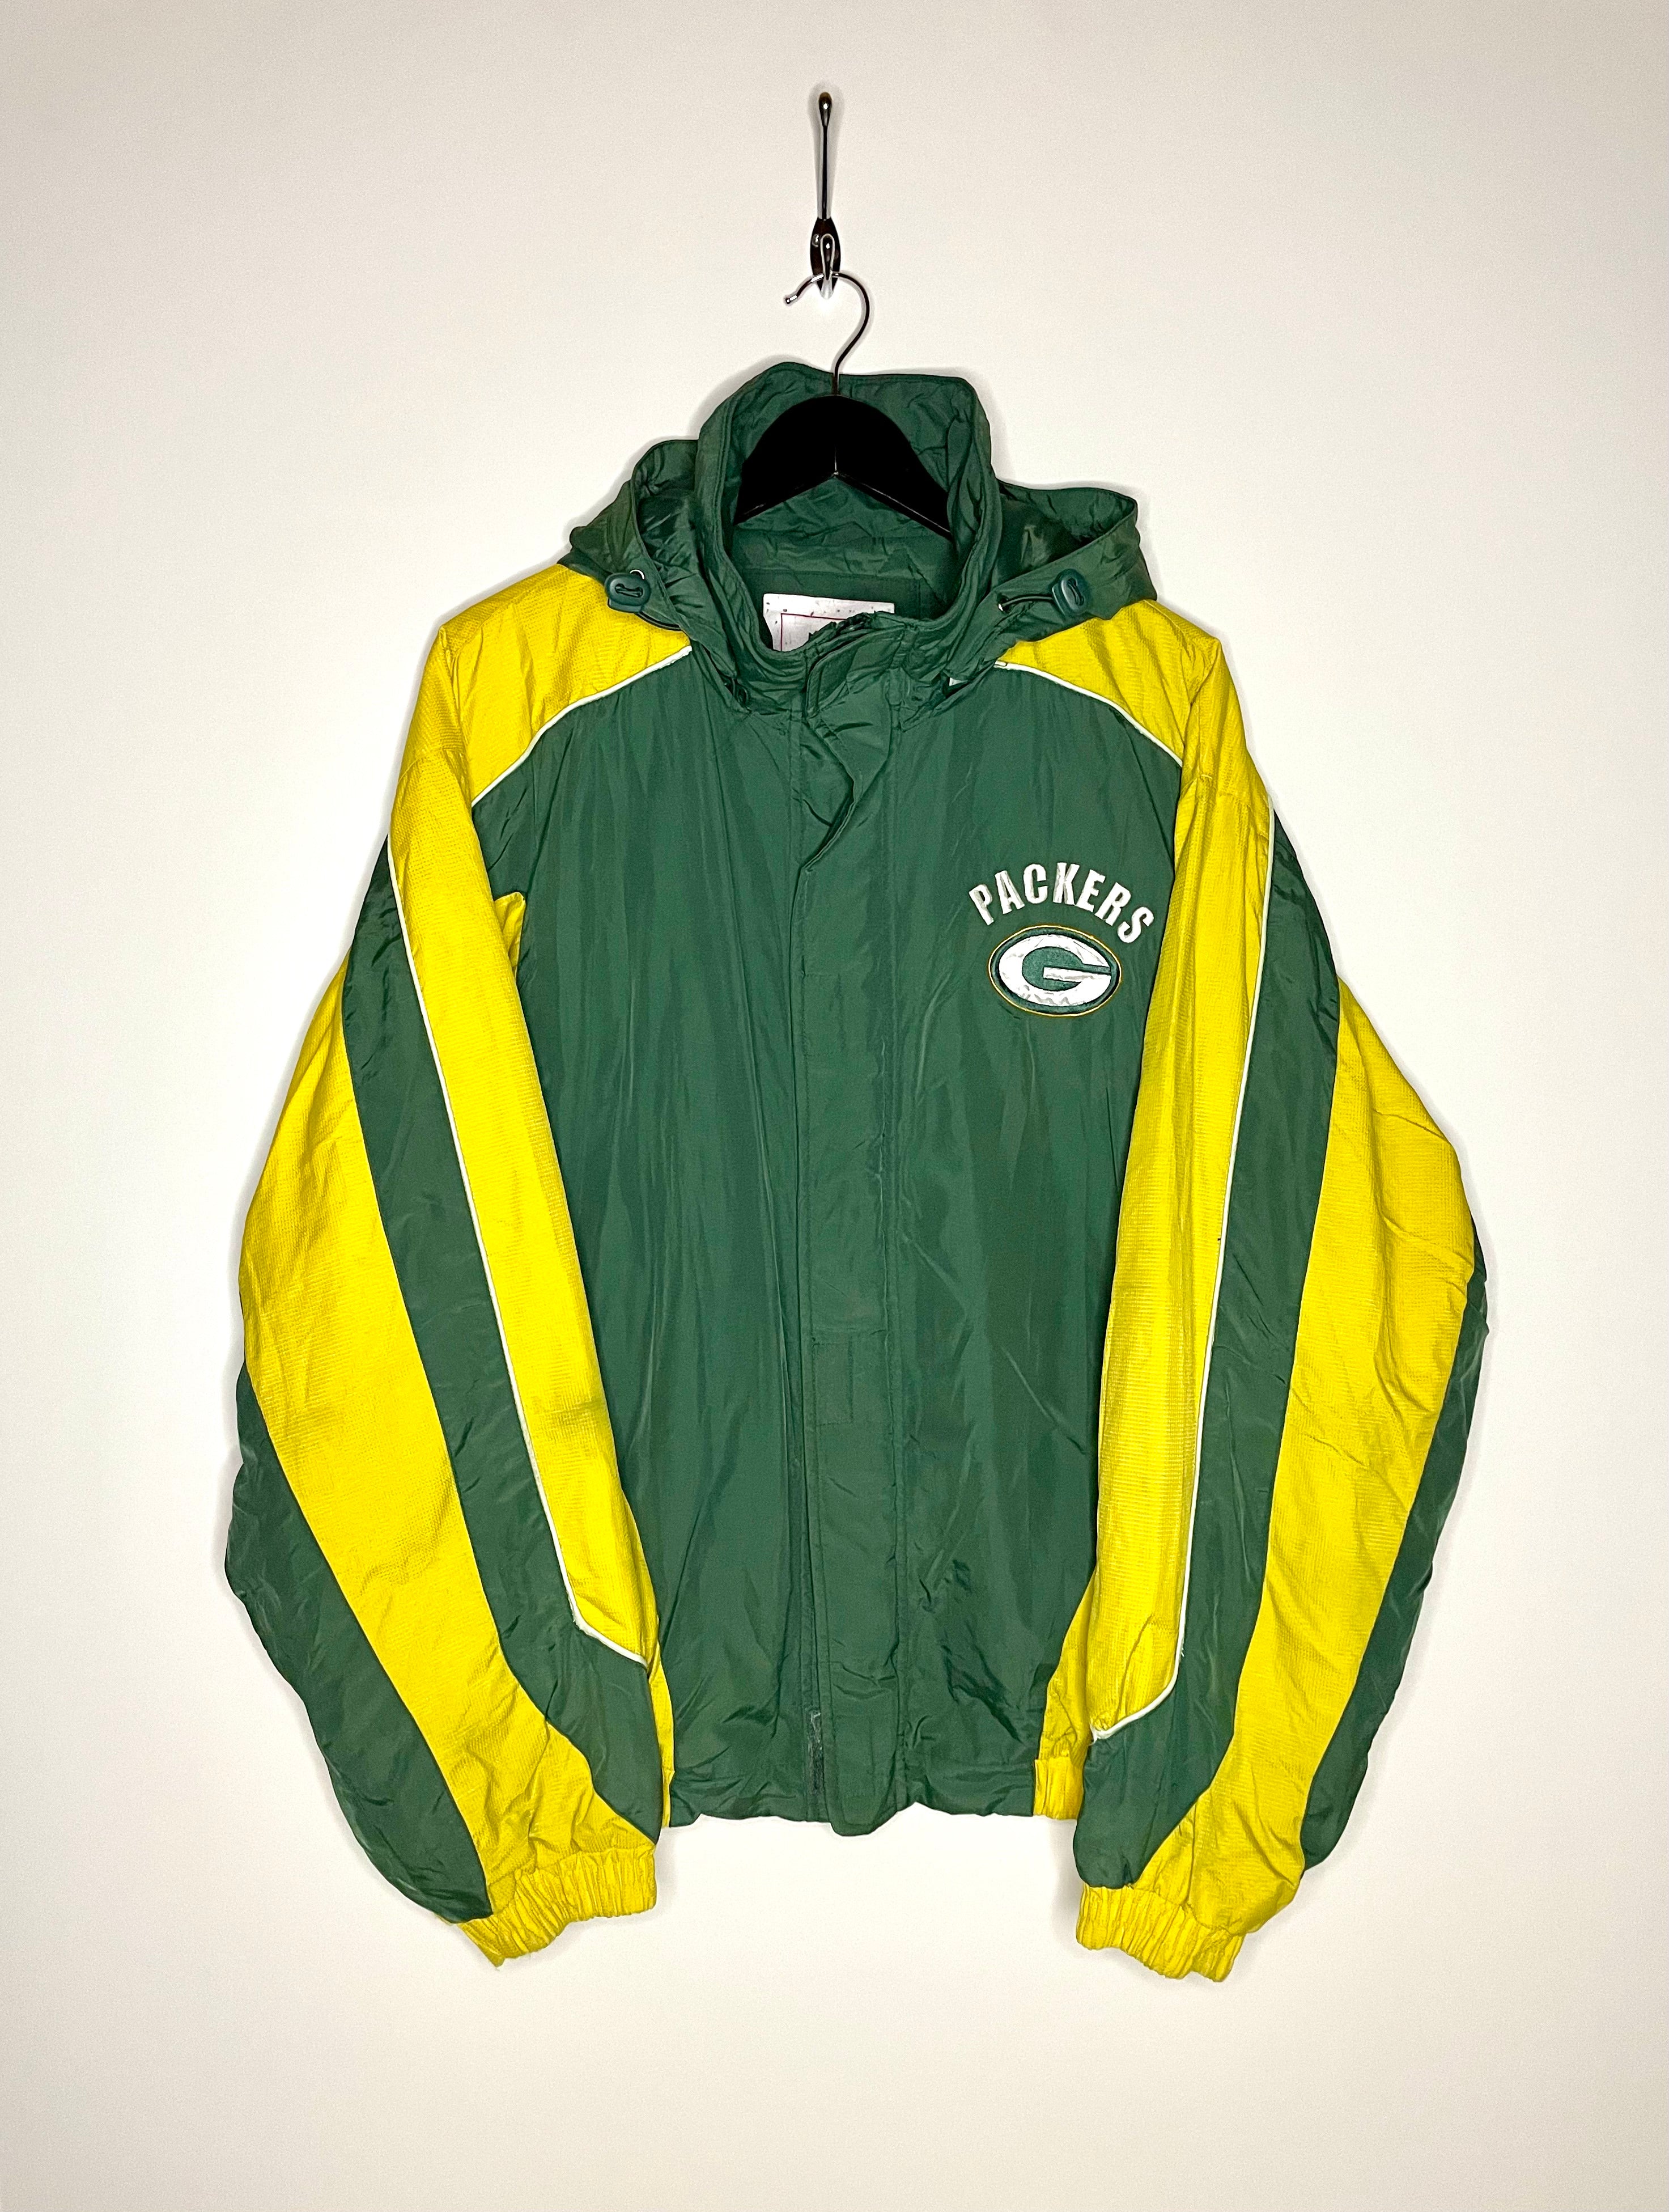 NFL Vintage Green Bay Packers Jacket Green/Yellow Size XL